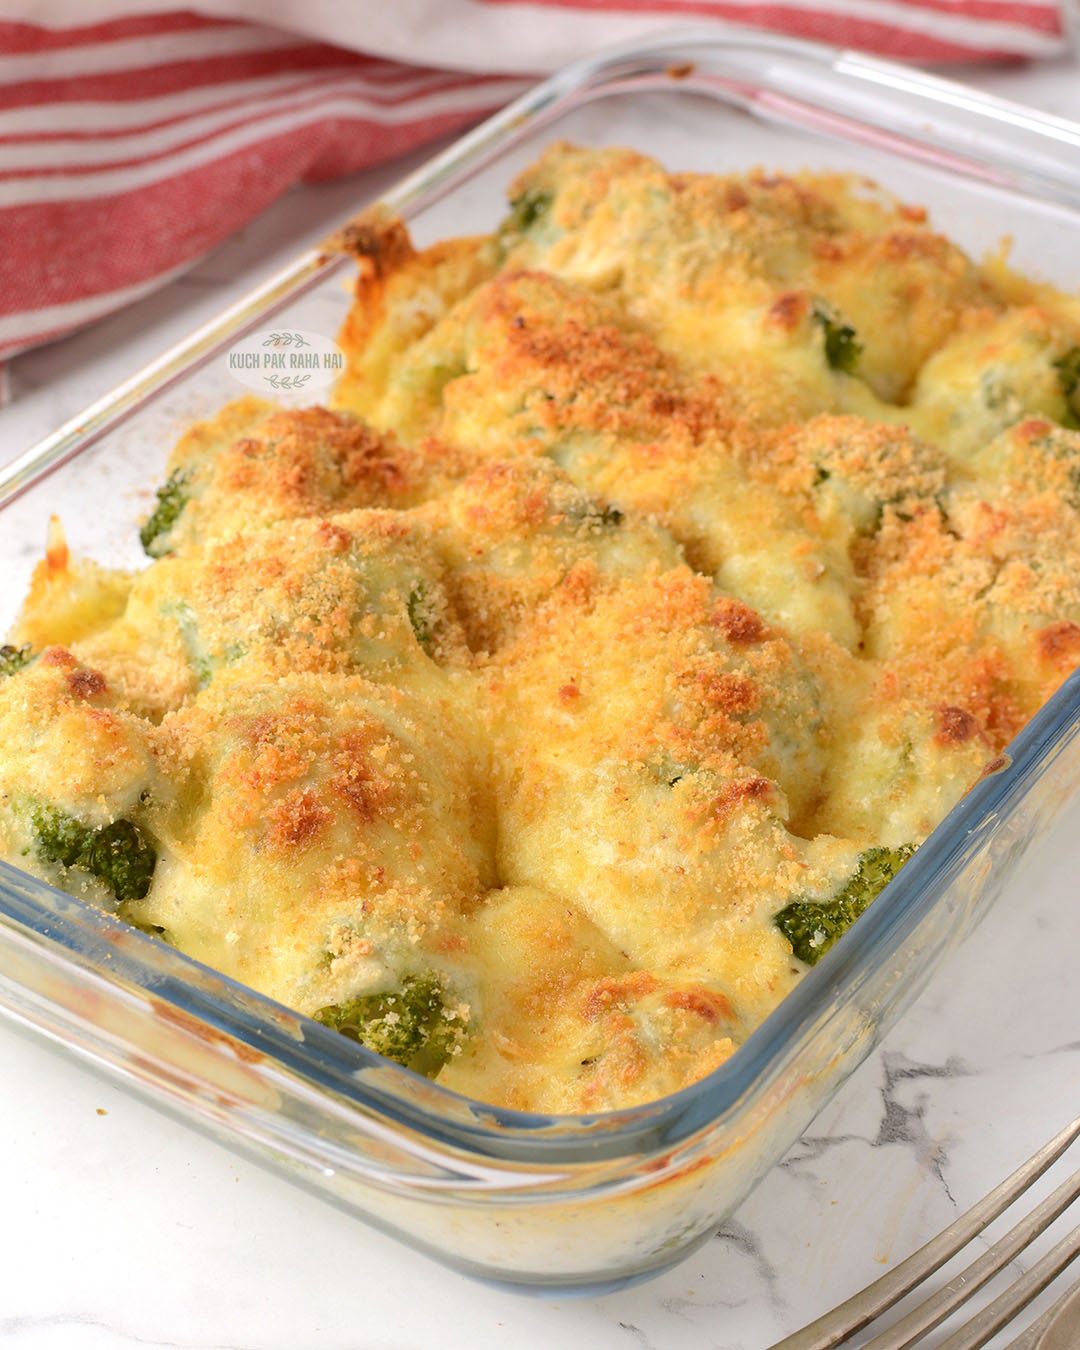 Broccoli Grating with cheddar cheese sauce.